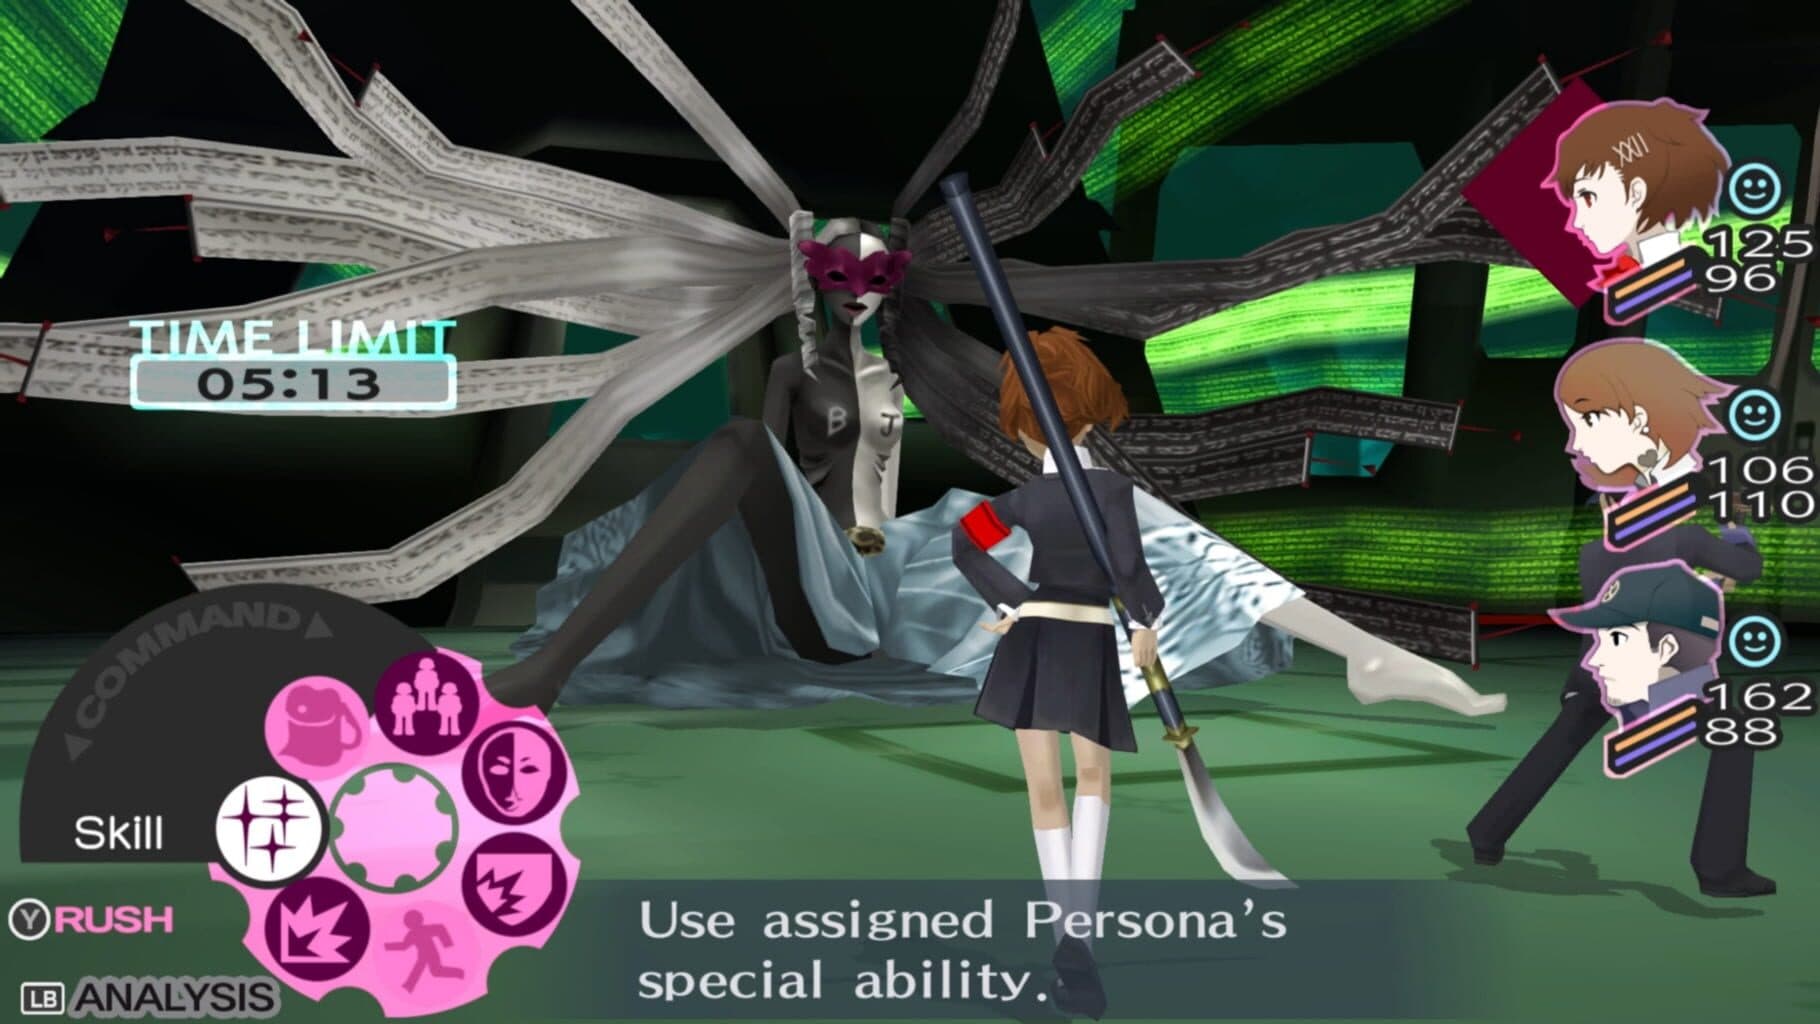 Persona Collection Image